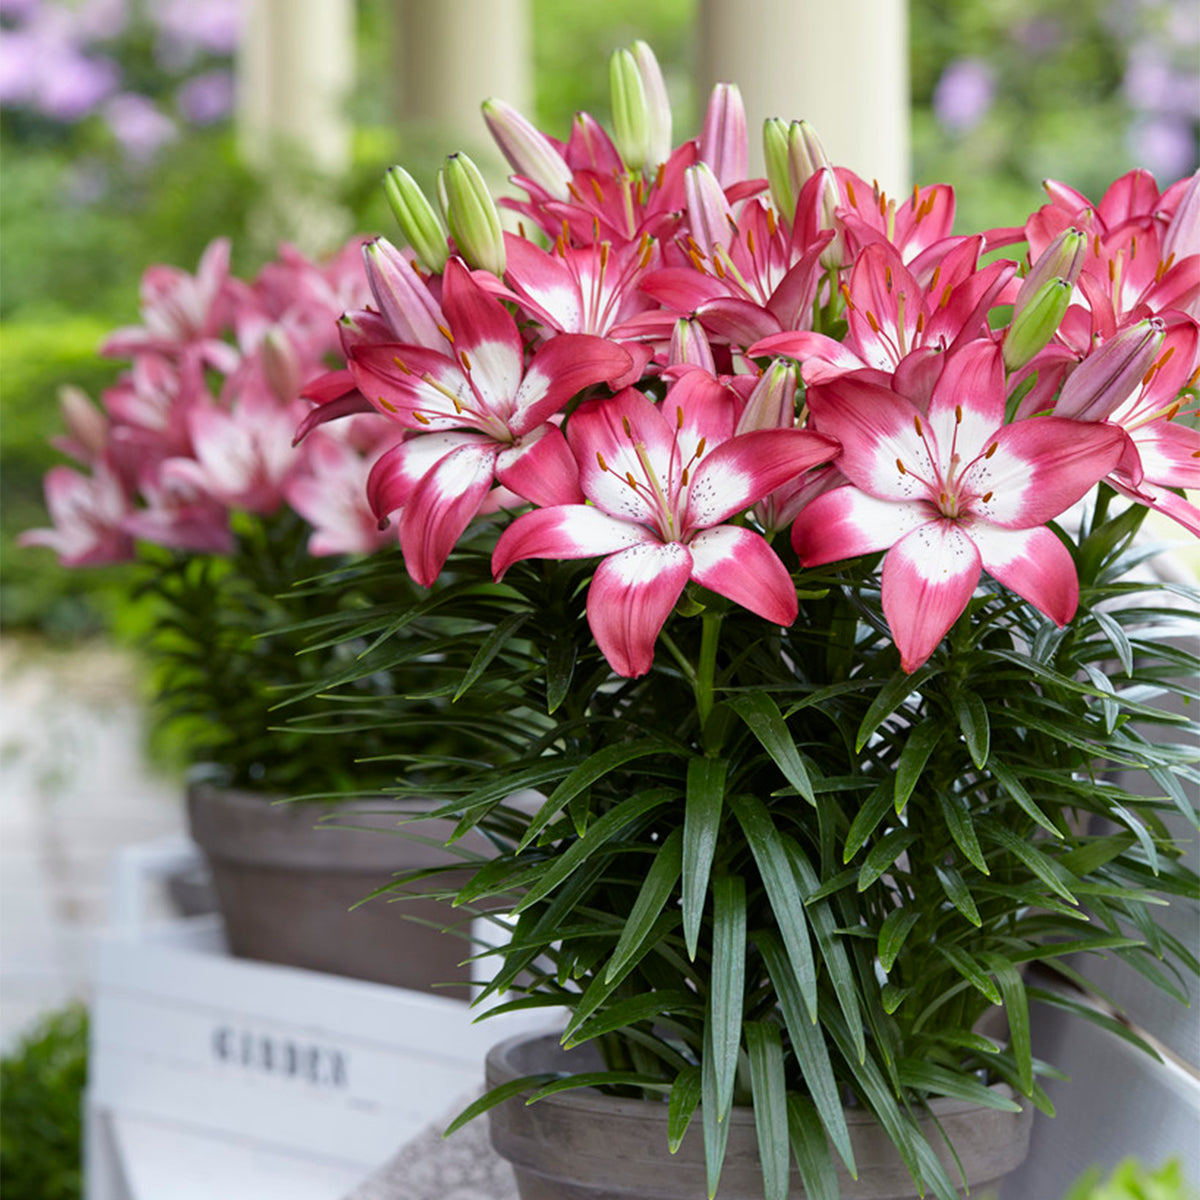 Flawless pink lilies, just beautiful.